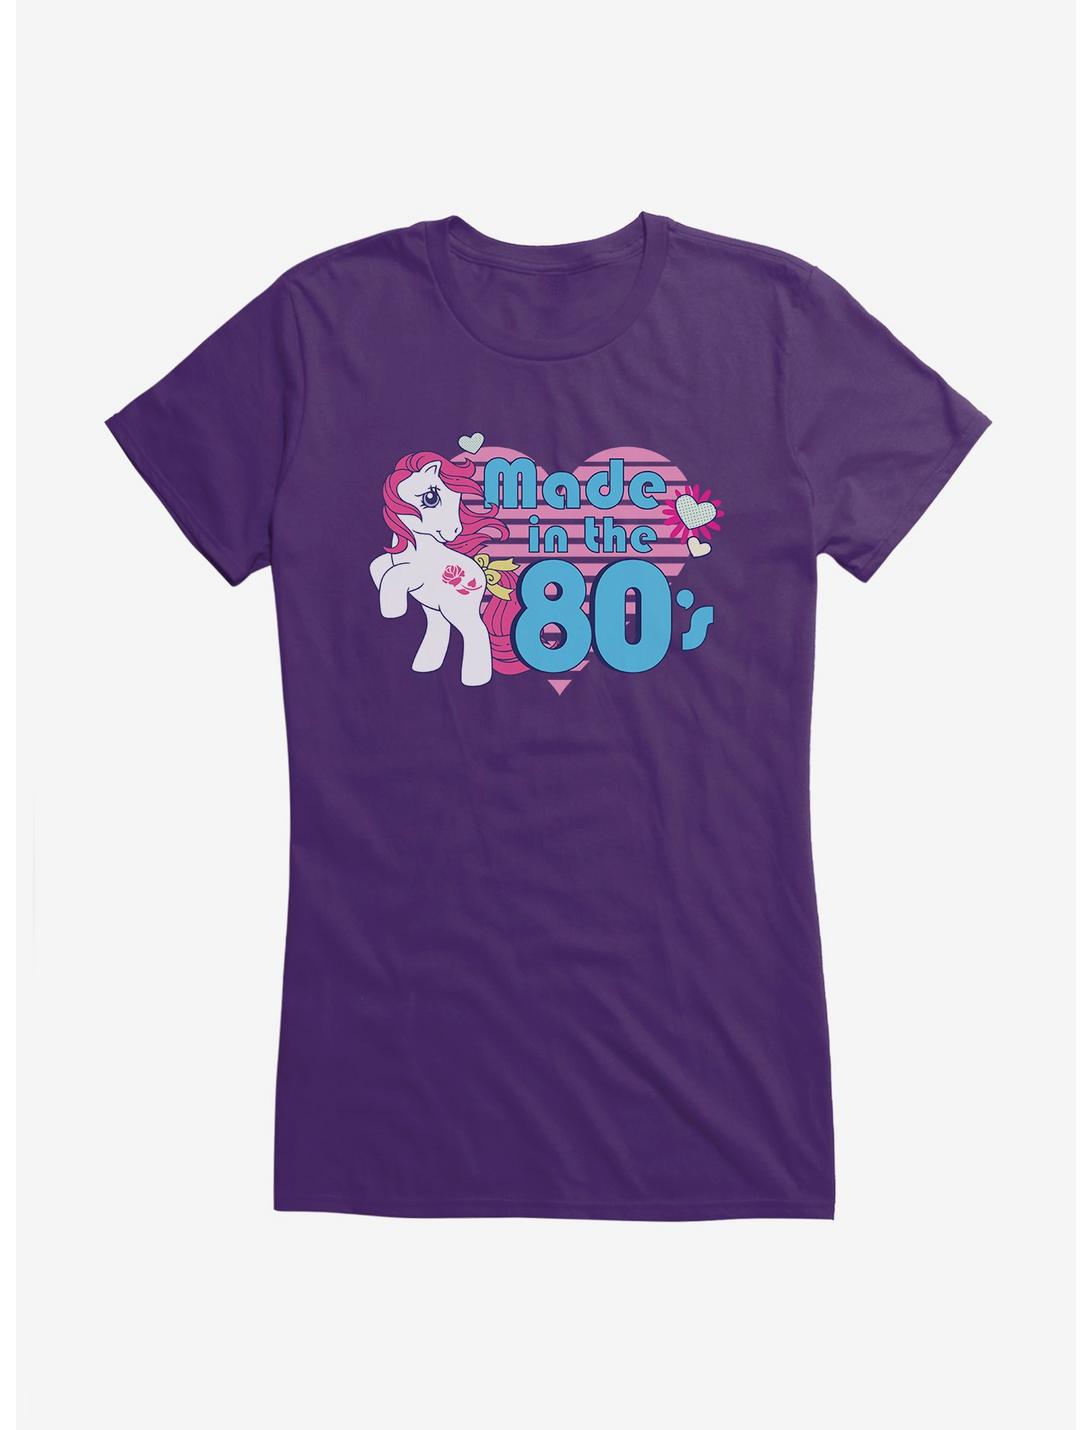 My Little Pony Made In The 80s Girls T-Shirt, PURPLE, hi-res